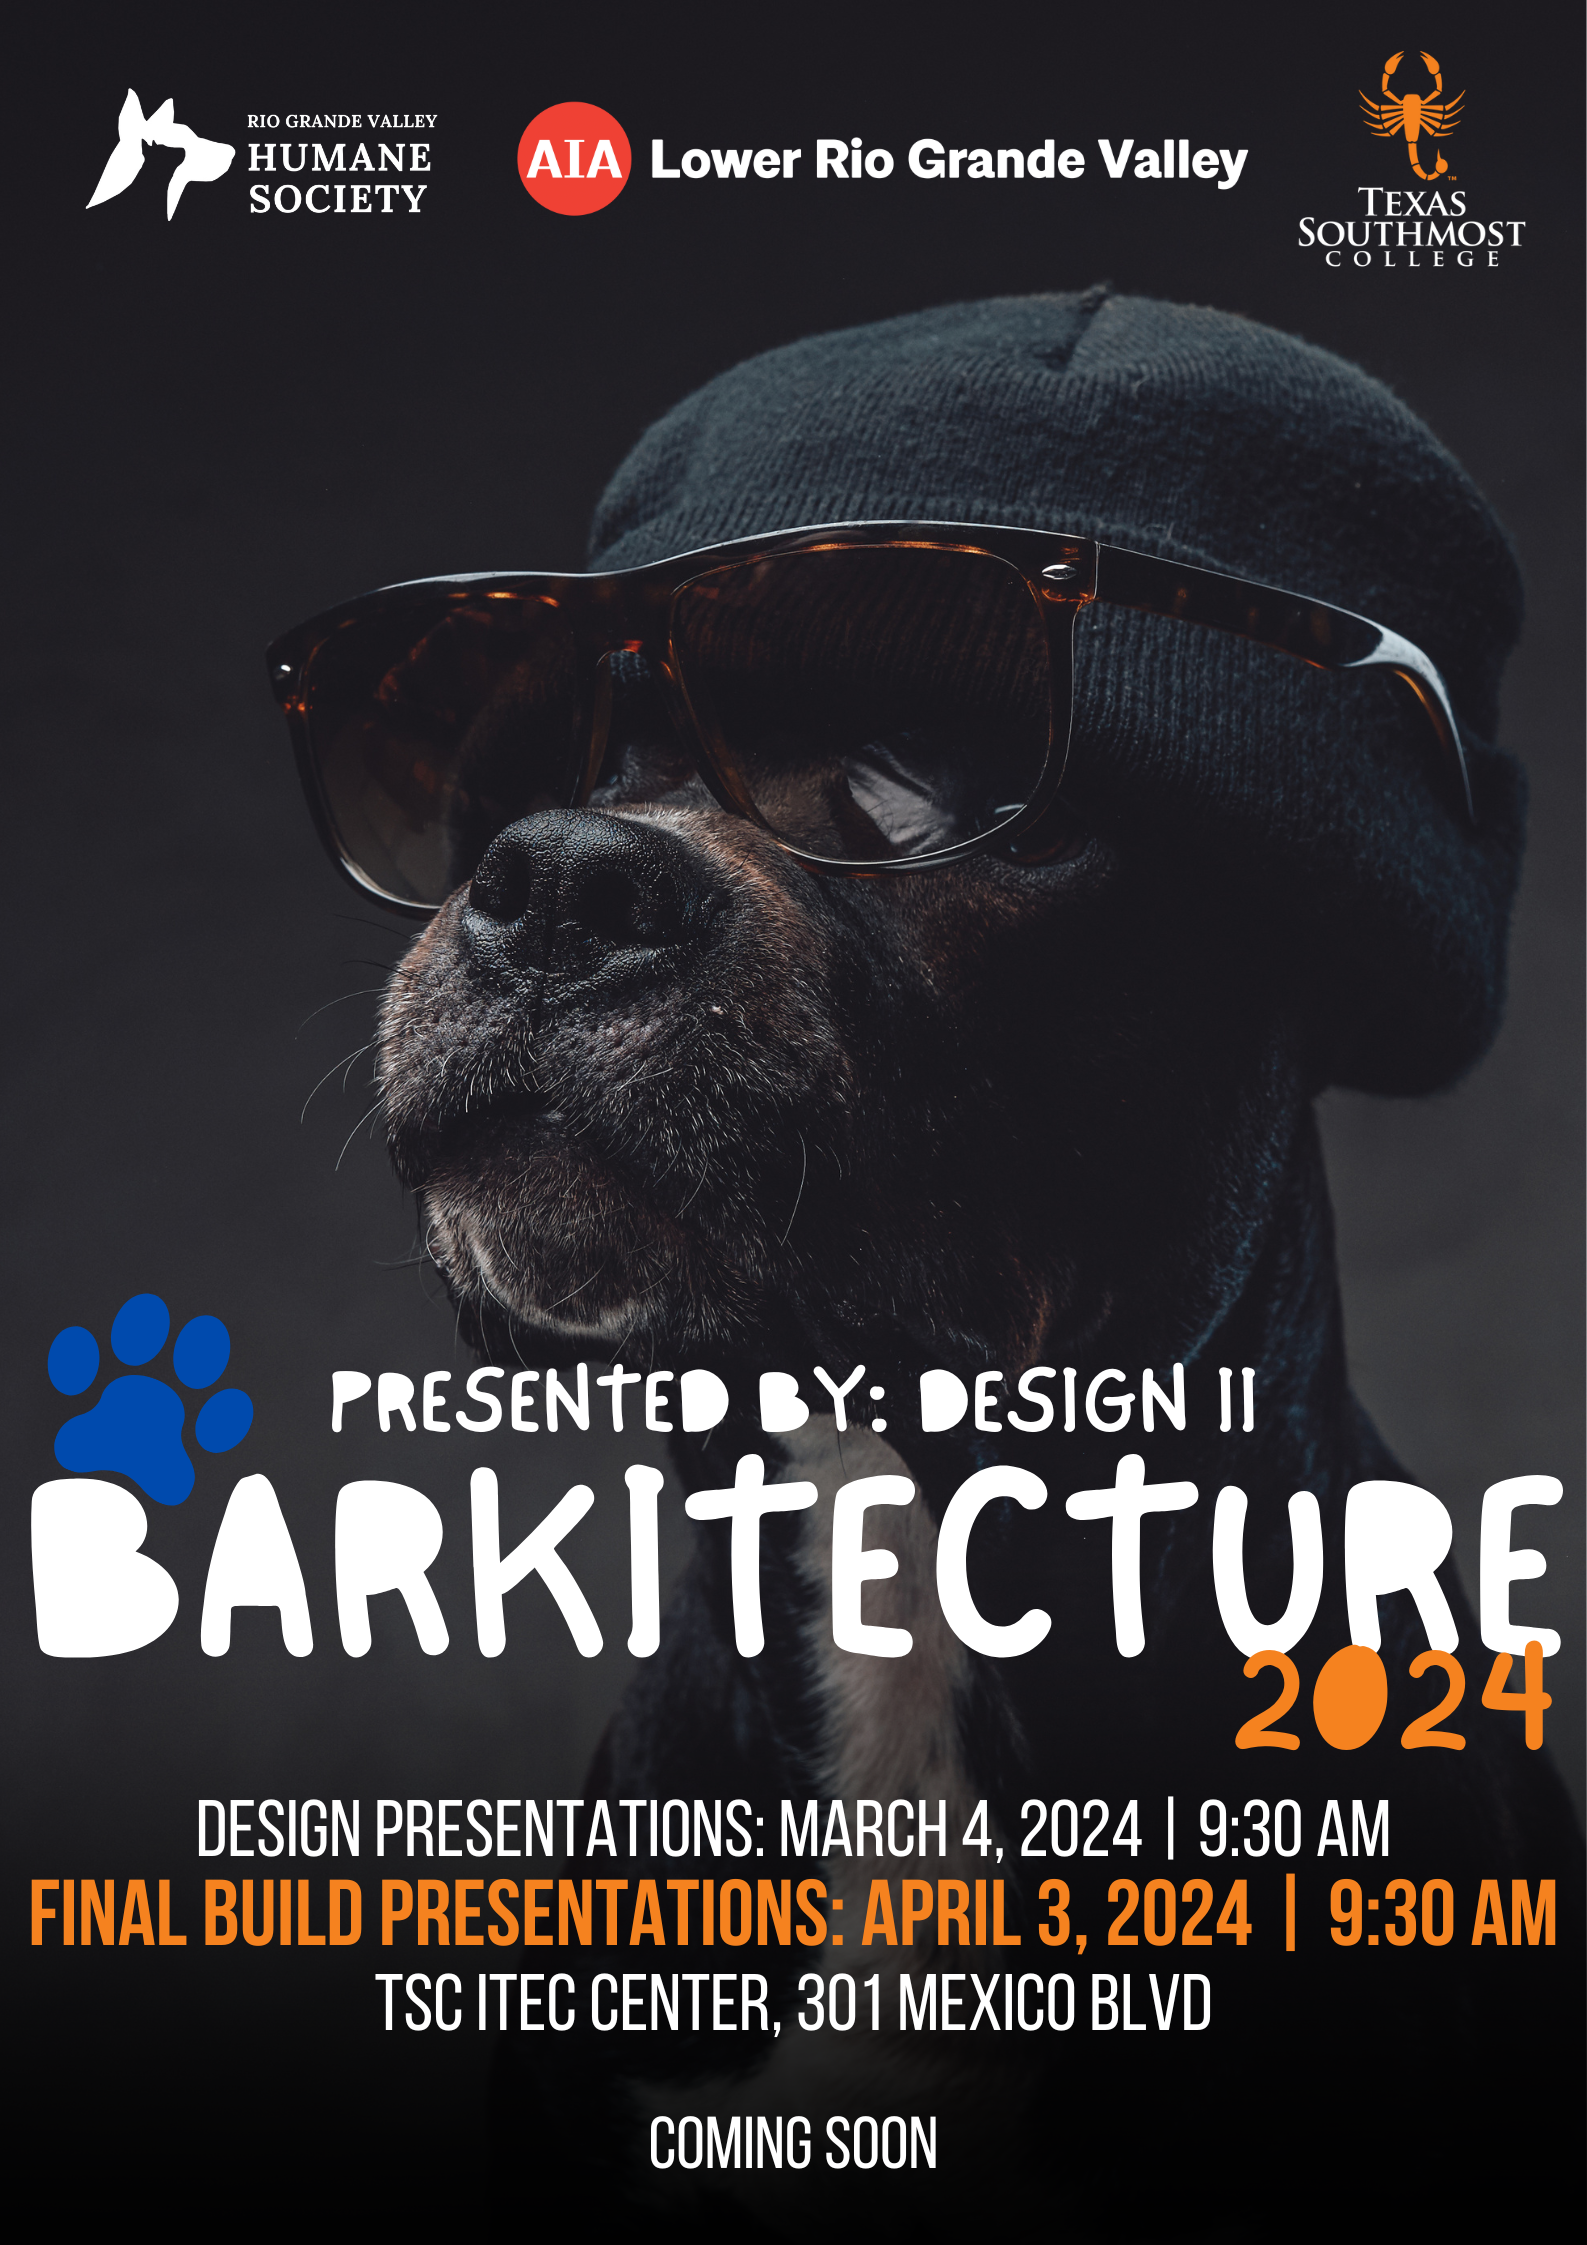 Texas Southmost College - Barkitecture